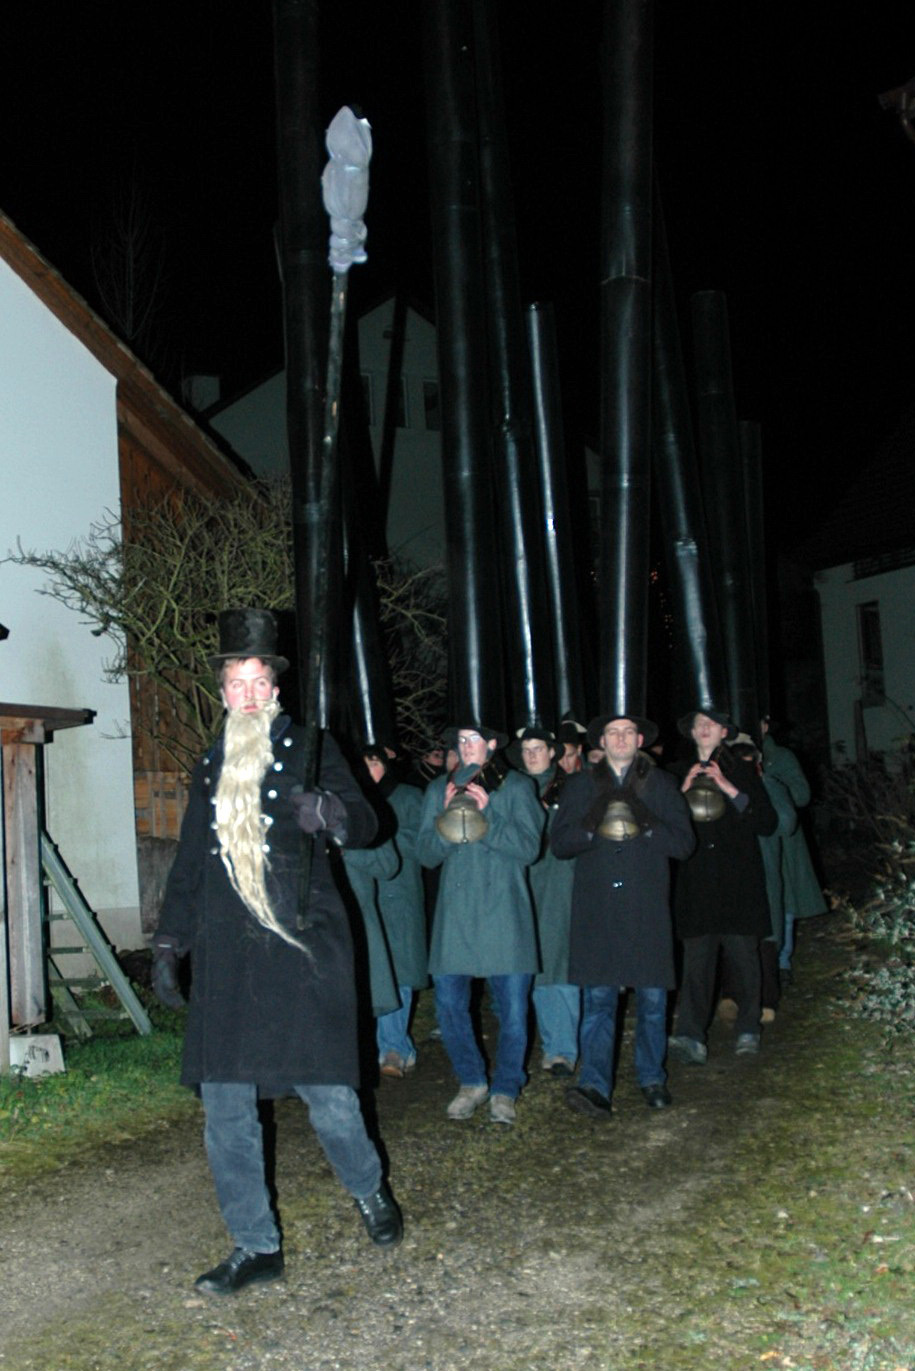 The Nüünichlinger are led by the Bäsemaa, who carries a soot cloth at the end of a long pole, 2004 © Beat Thommen